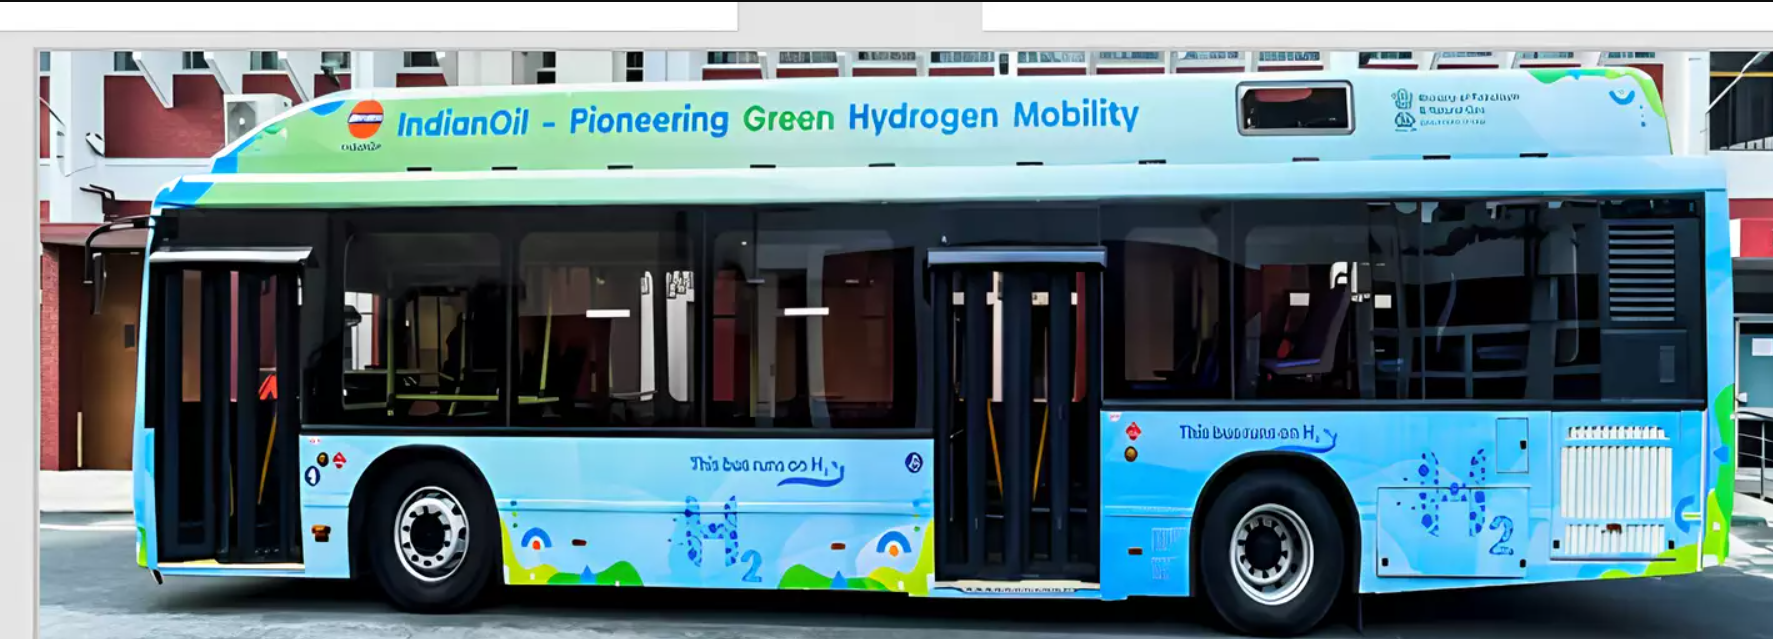 <p>Underlining this transformative move, IndianOil has spearheaded a program to test 15 Fuel Cell buses fueled by Green hydrogen across designated routes in Delhi, Haryana, and U.P.</p>